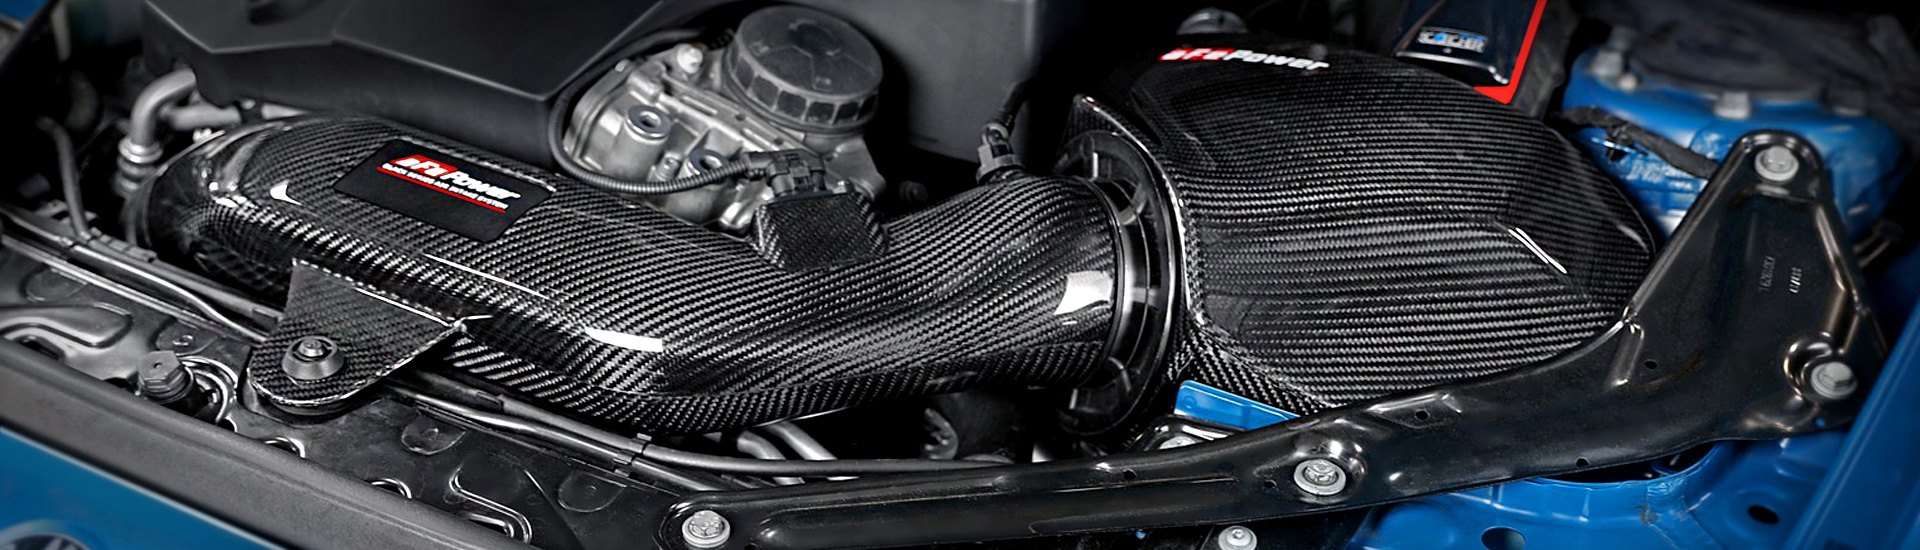 Gain More Power With aFe Momentum And Magnum Force Cold Air Intakes